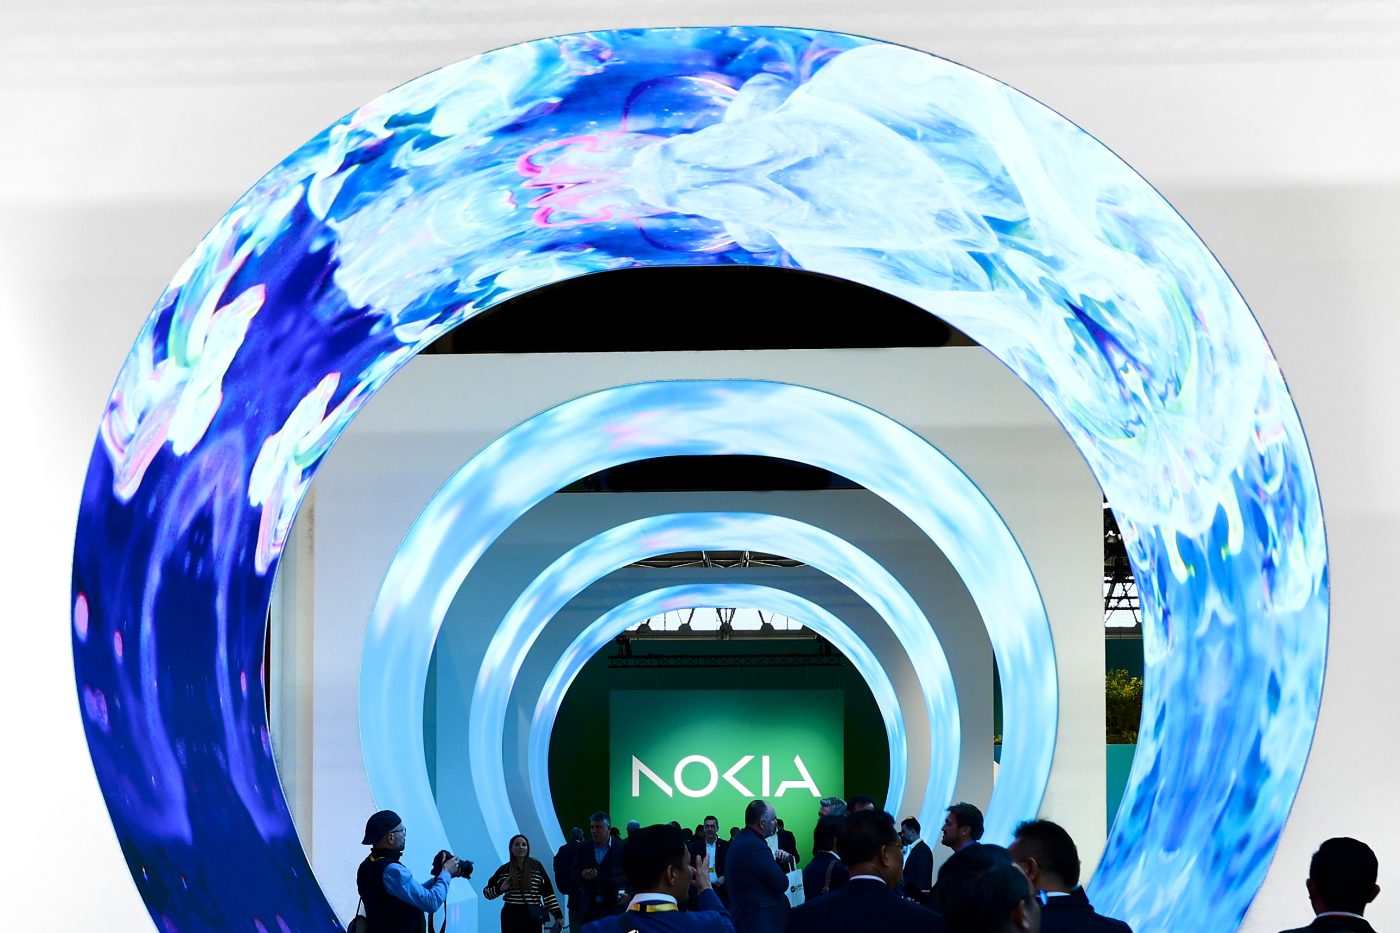 Photo: BARCELONA, SPAIN - MARCH 2: Congress visitors passing by the entrance of the Nokia stand that featured the new redesigned logo. The Finnish company announced the rebranding and the change on their logo, the first in 60 years, to let customers know that they not only make phones, but they also have a huge role on networks and industrial digitalization during the Mobile World Congress 2023 on March 2, 2023, in Barcelona, Spain. Credit: Photo by Joan Cros/NurPhoto